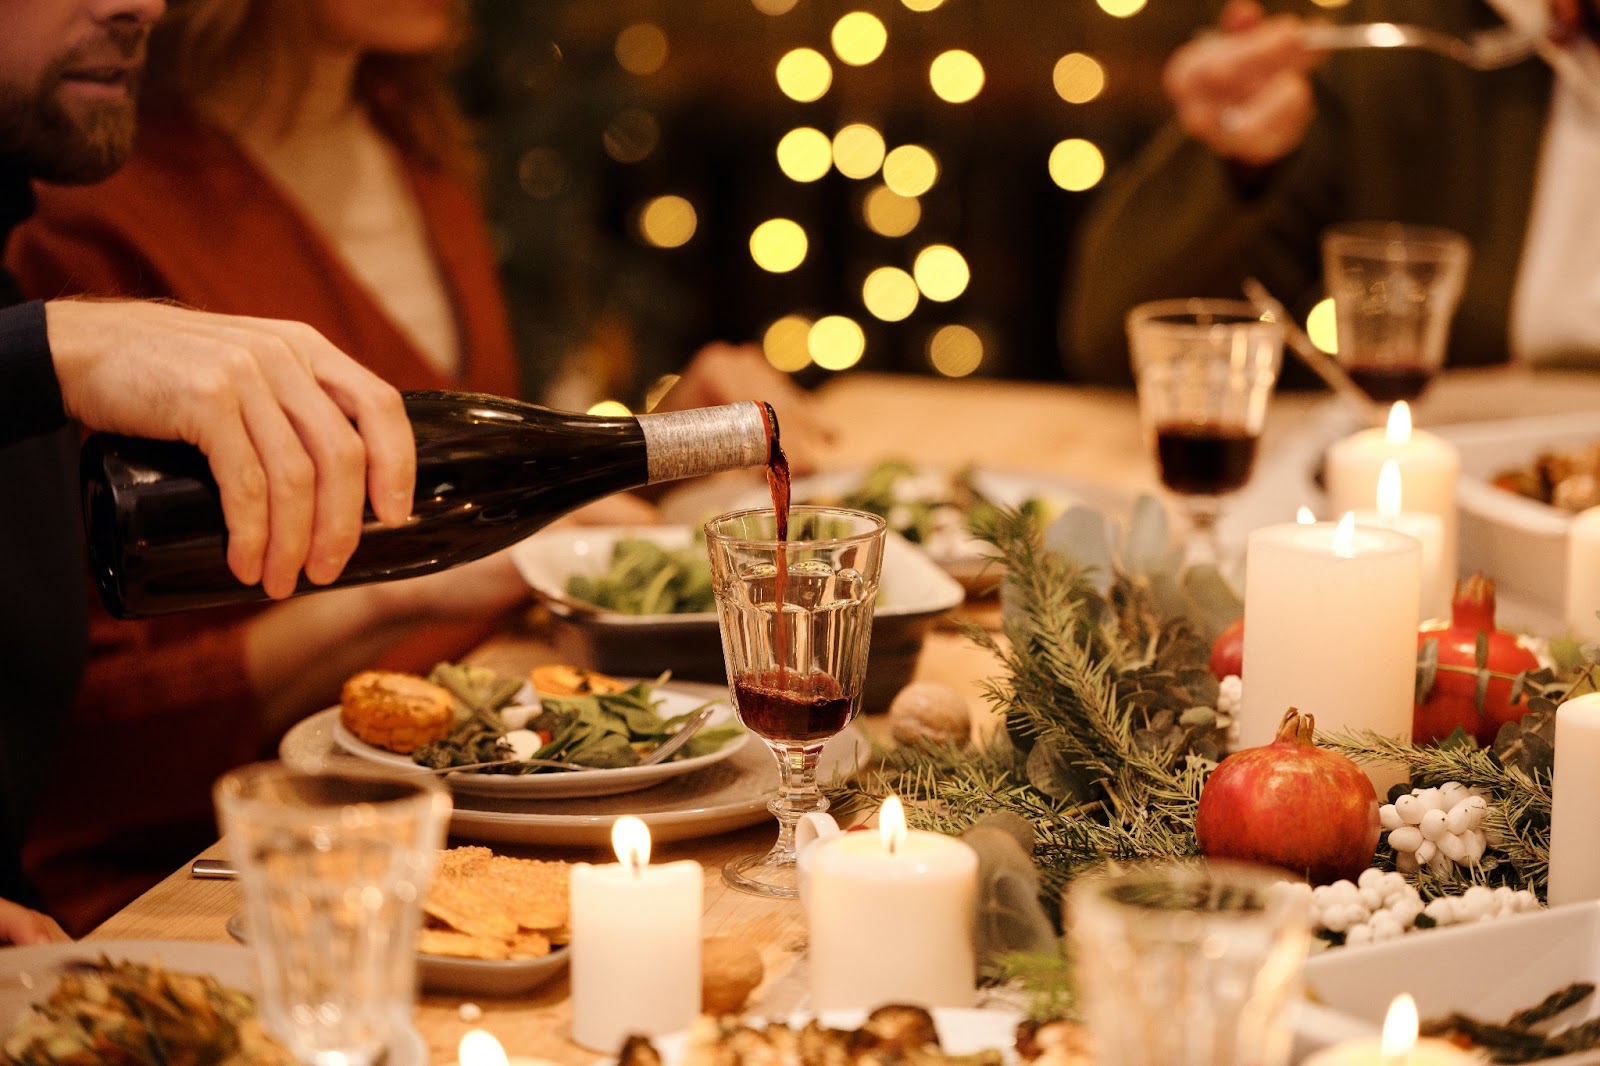 a person's hand pouring red wine into a glass at a festive dinner table